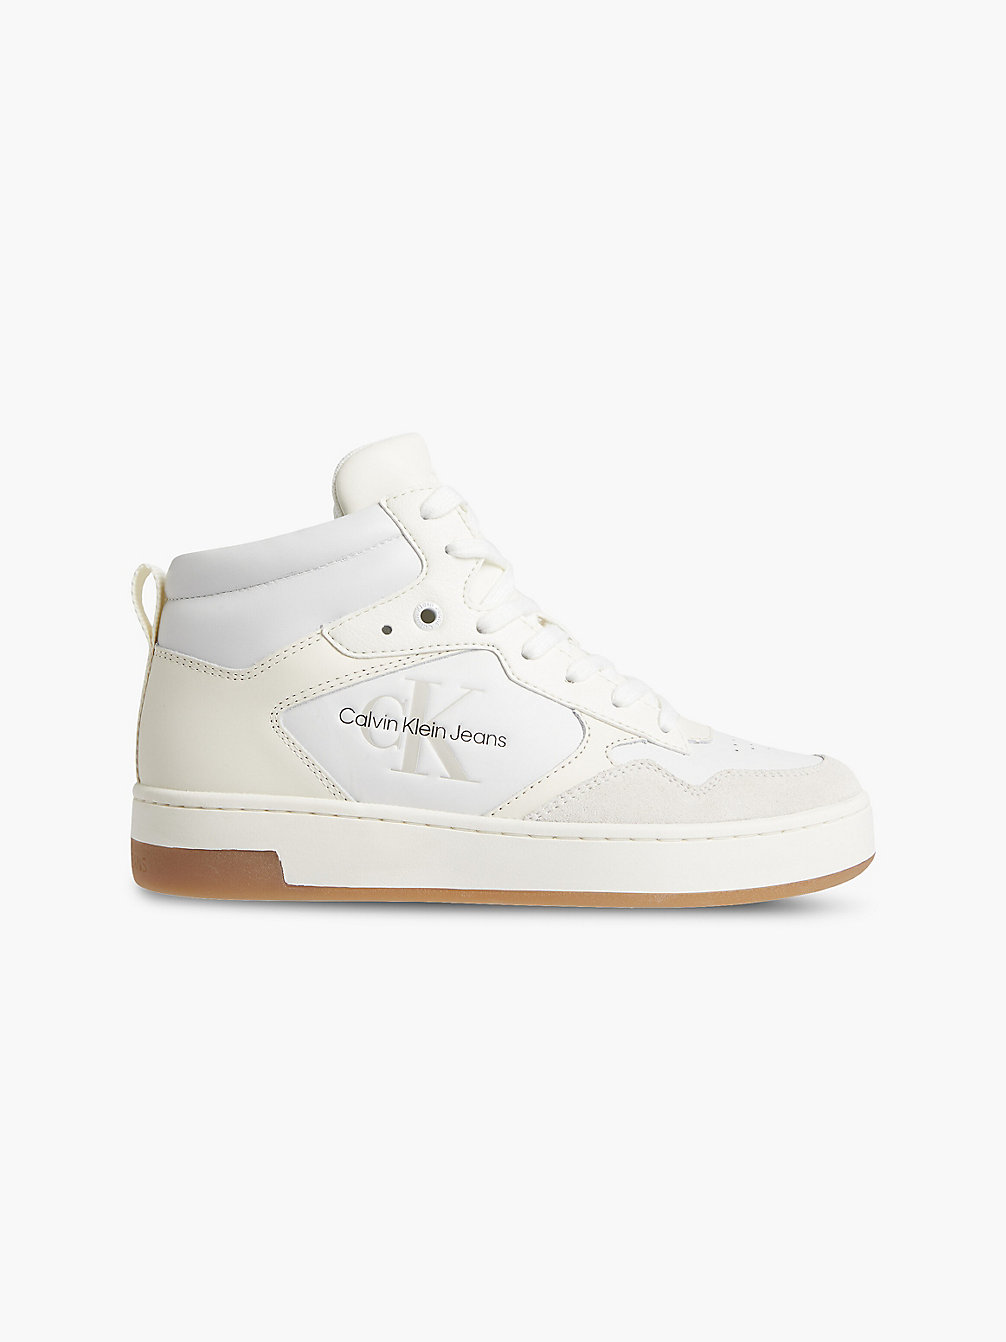 IVORY/BRIGHT WHITE > Leren High-Top Sneakers > undefined dames - Calvin Klein